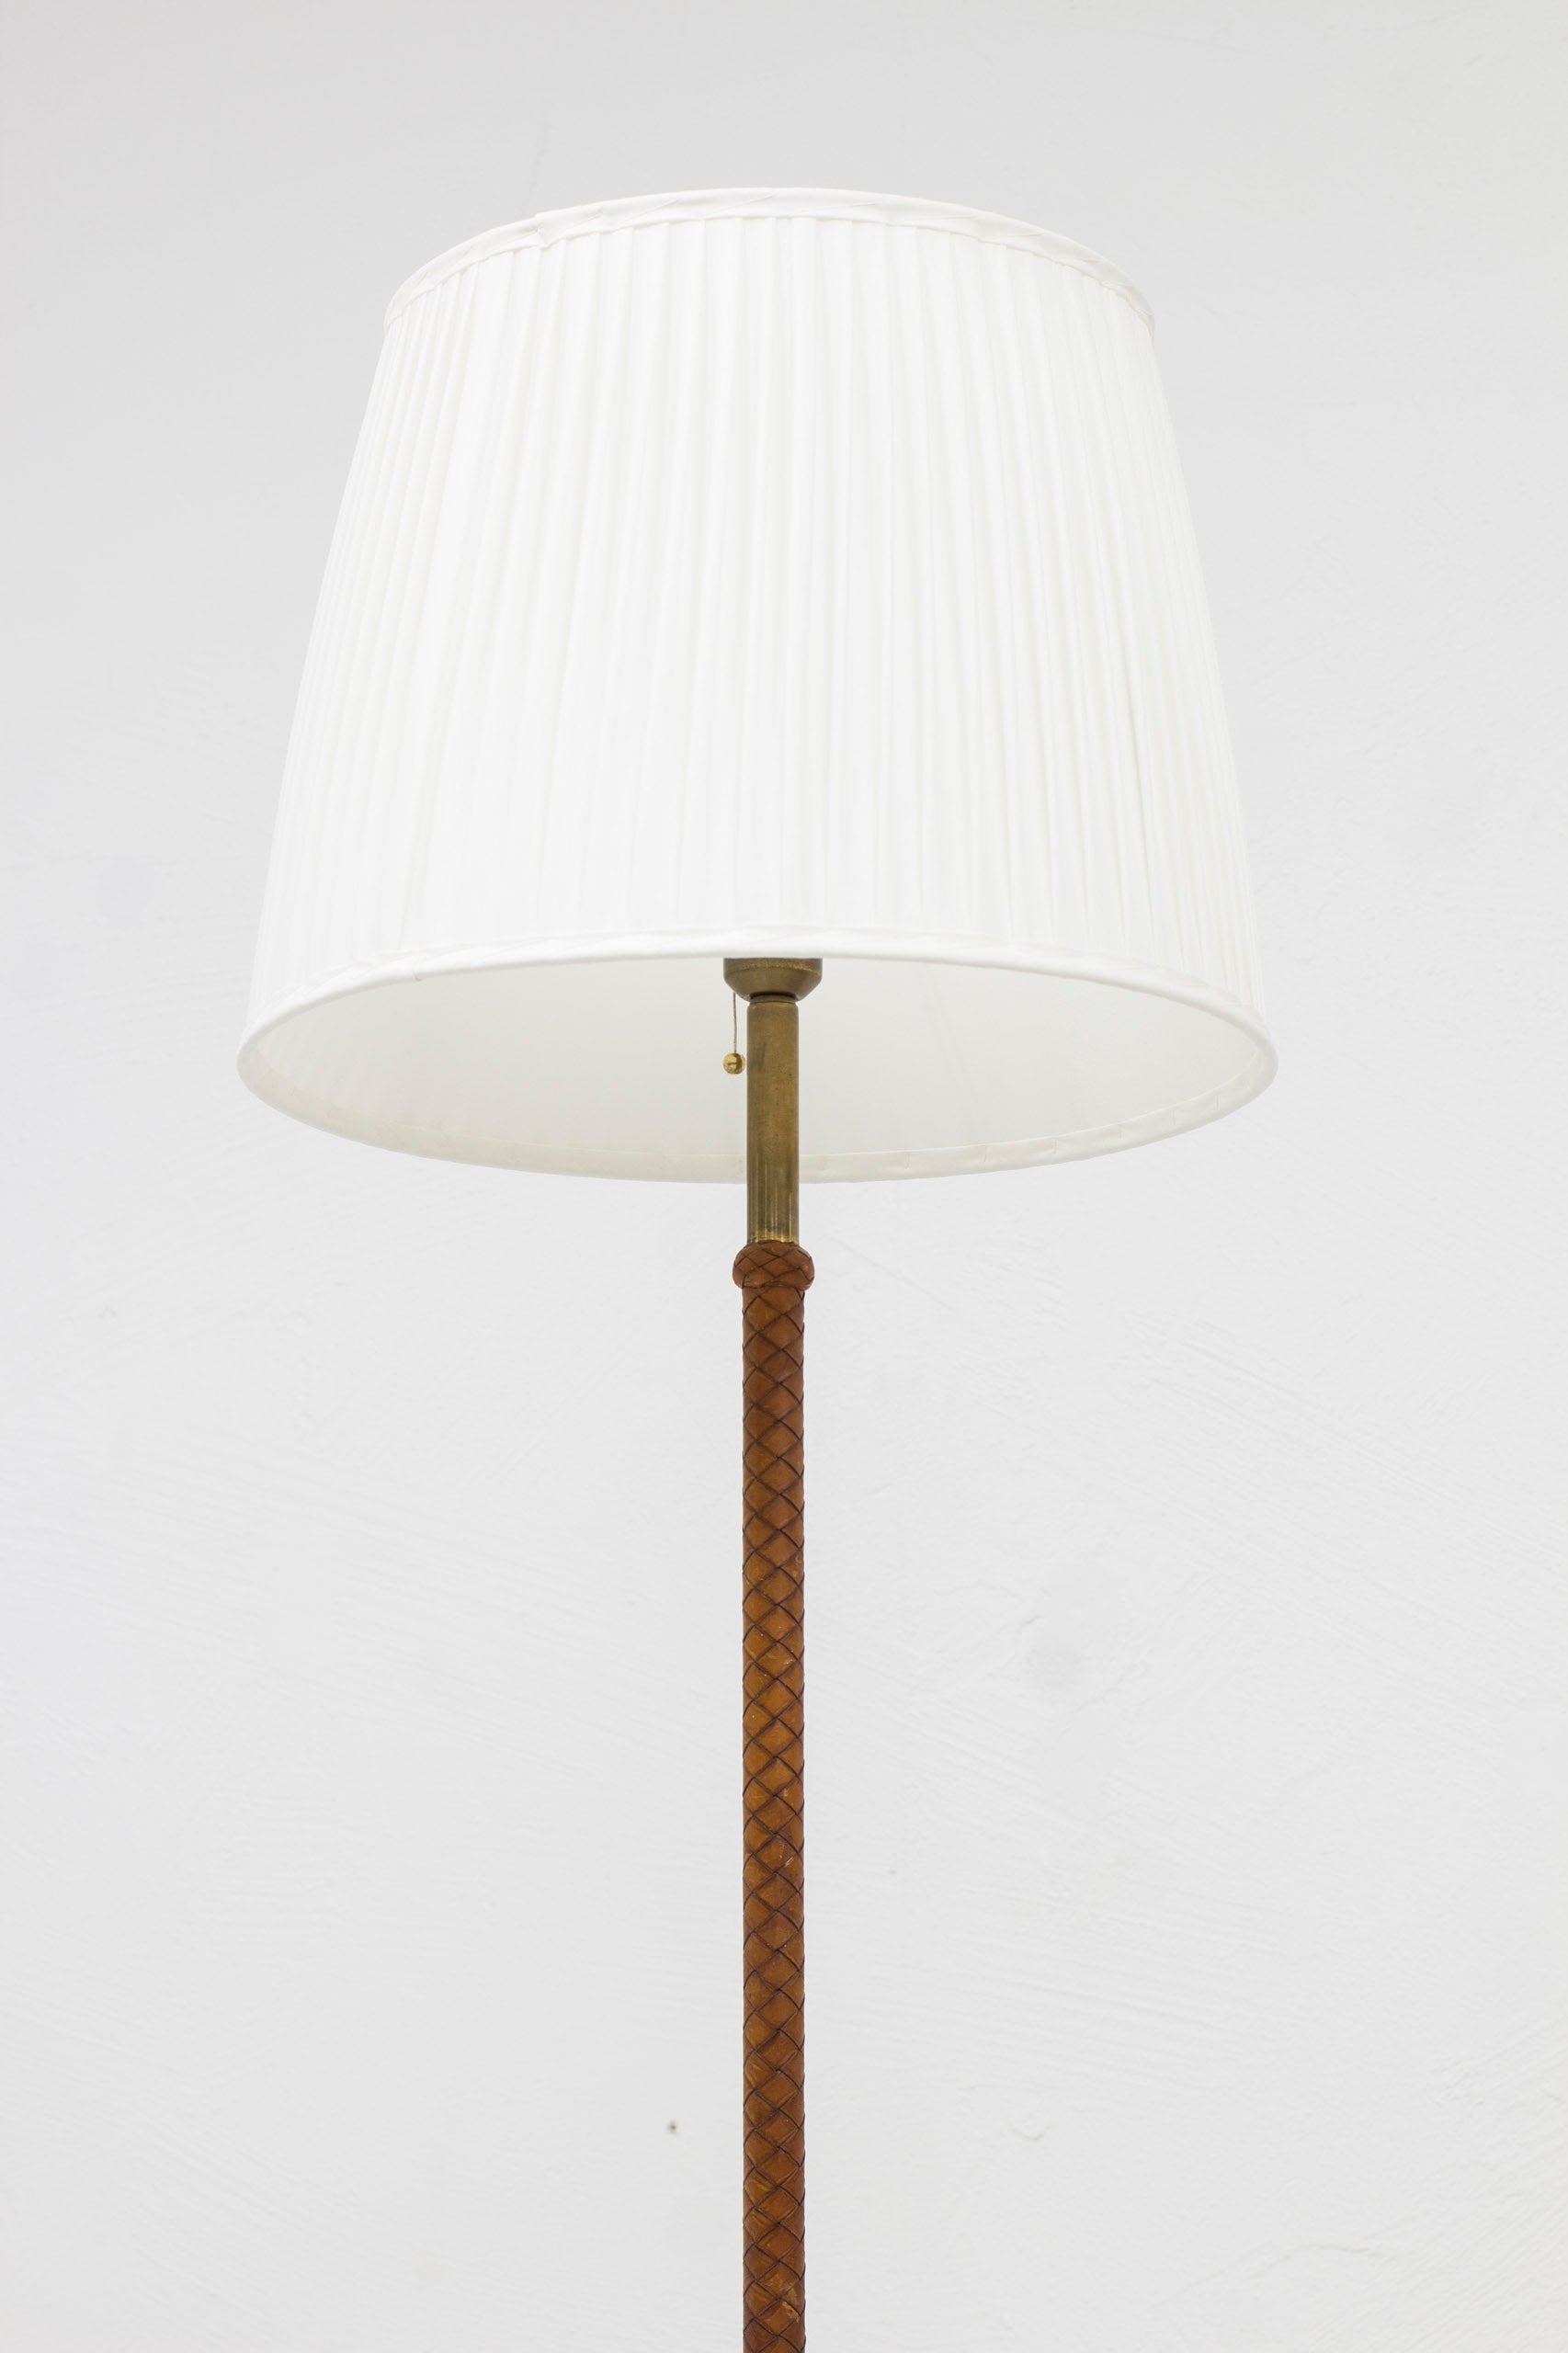 Swedish modern floor lamp with braided leather